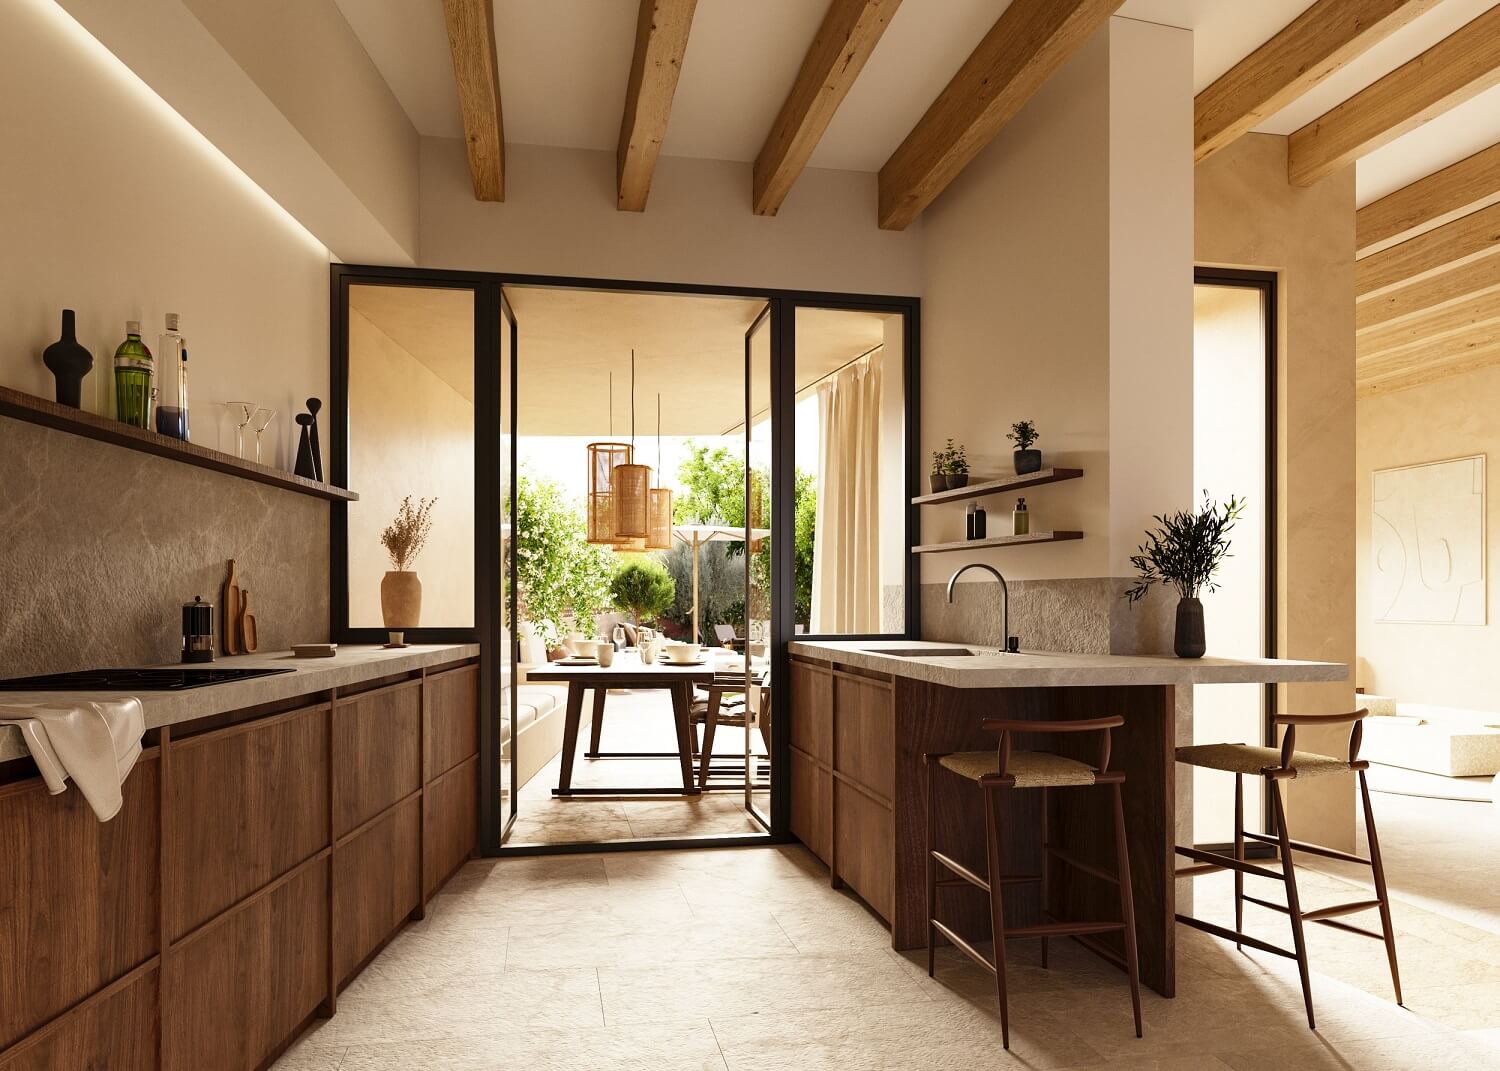 kitchen-walnut-cabinets-exposed-beams-townhouse-mallorca-nordroom